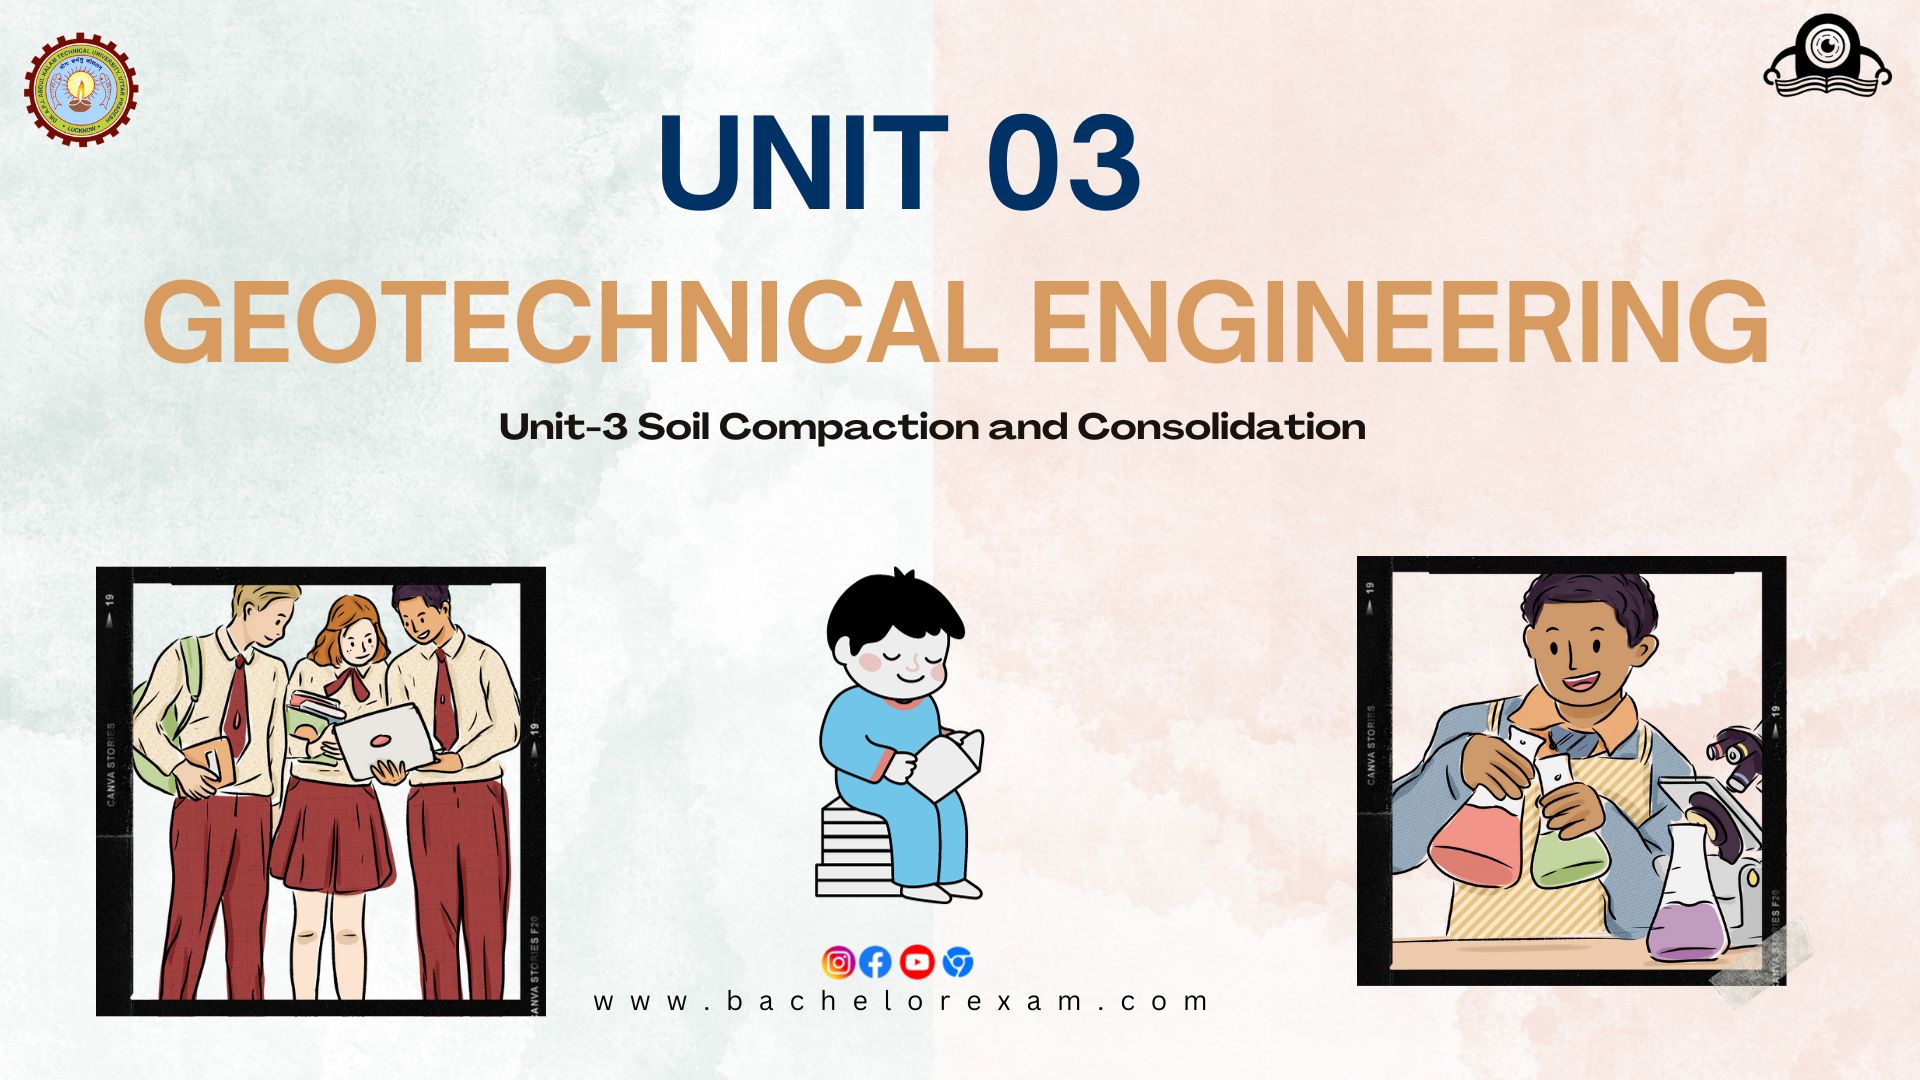 (Aktu Btech) Geotechnical Engineering Important Unit-3 Soil Compaction and Consolidation